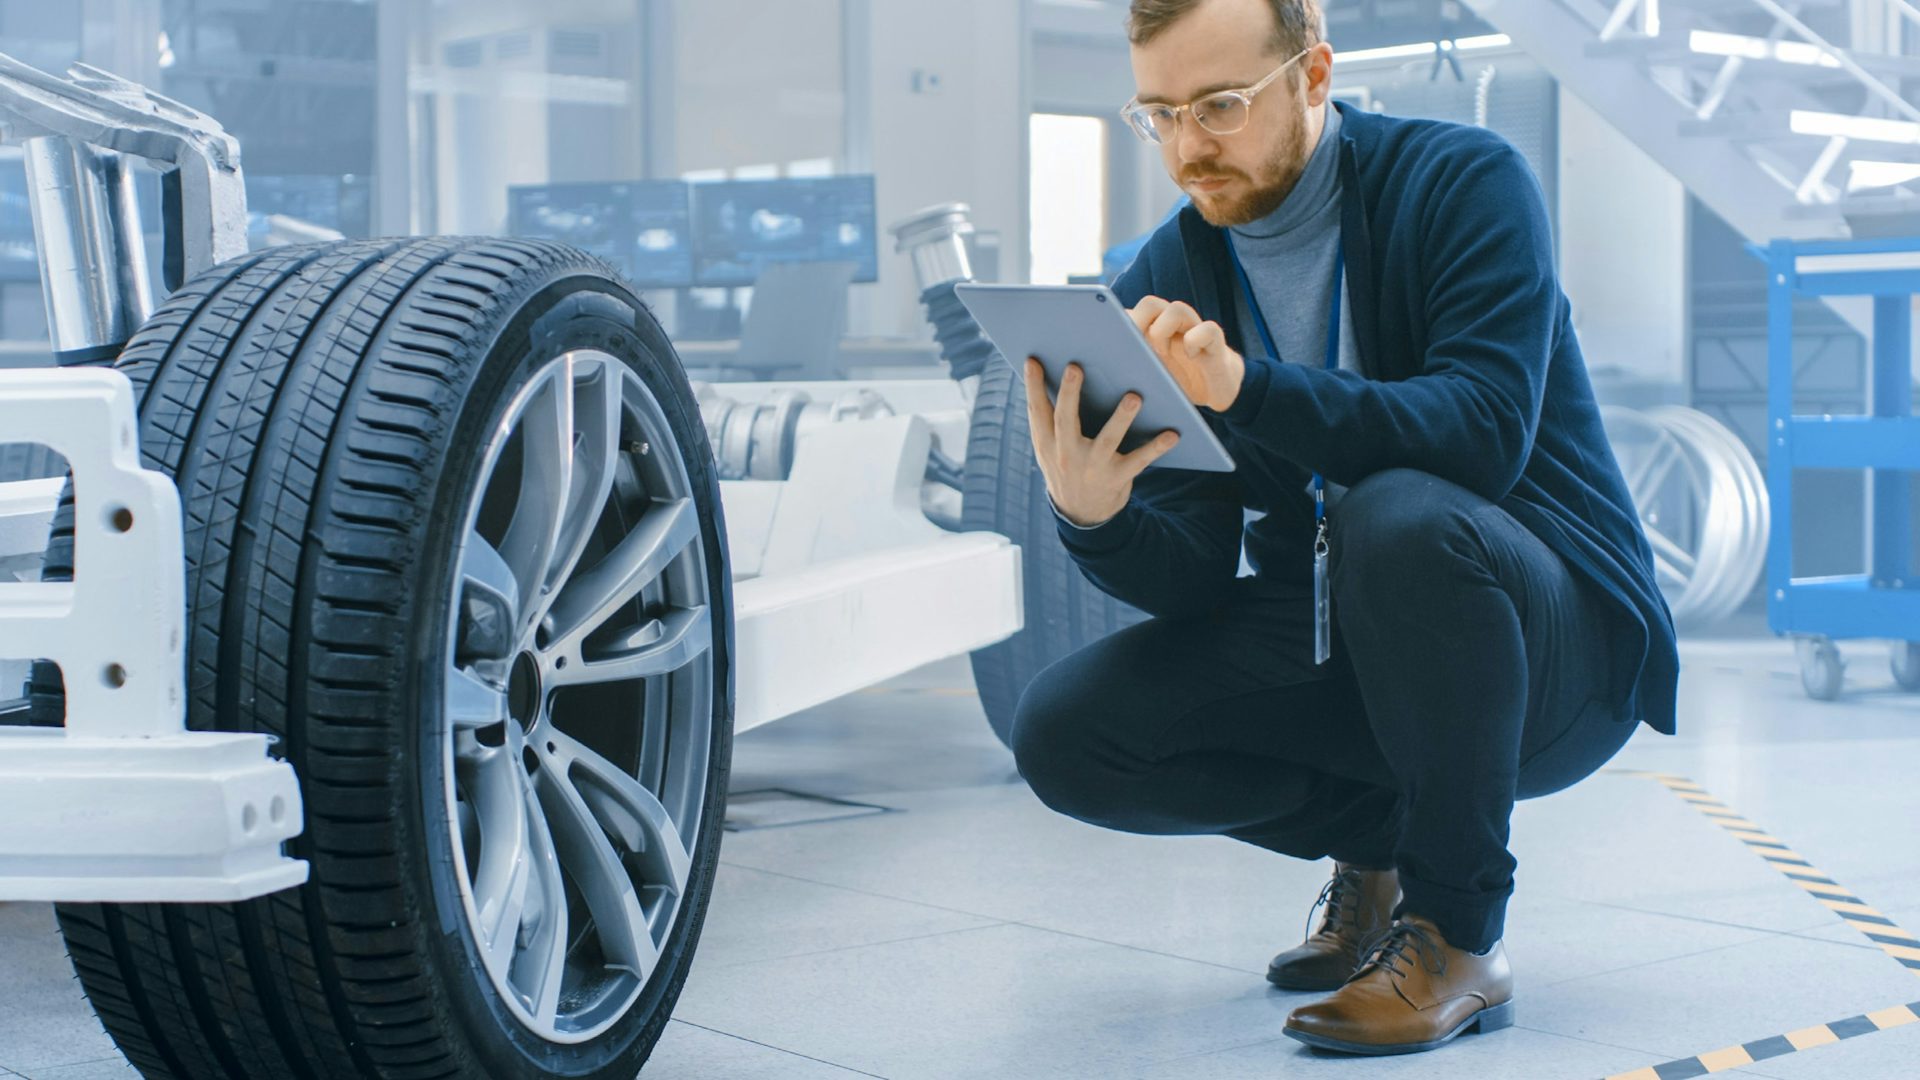 A man kneels in front of a tire as he looks at information on a tablet computer